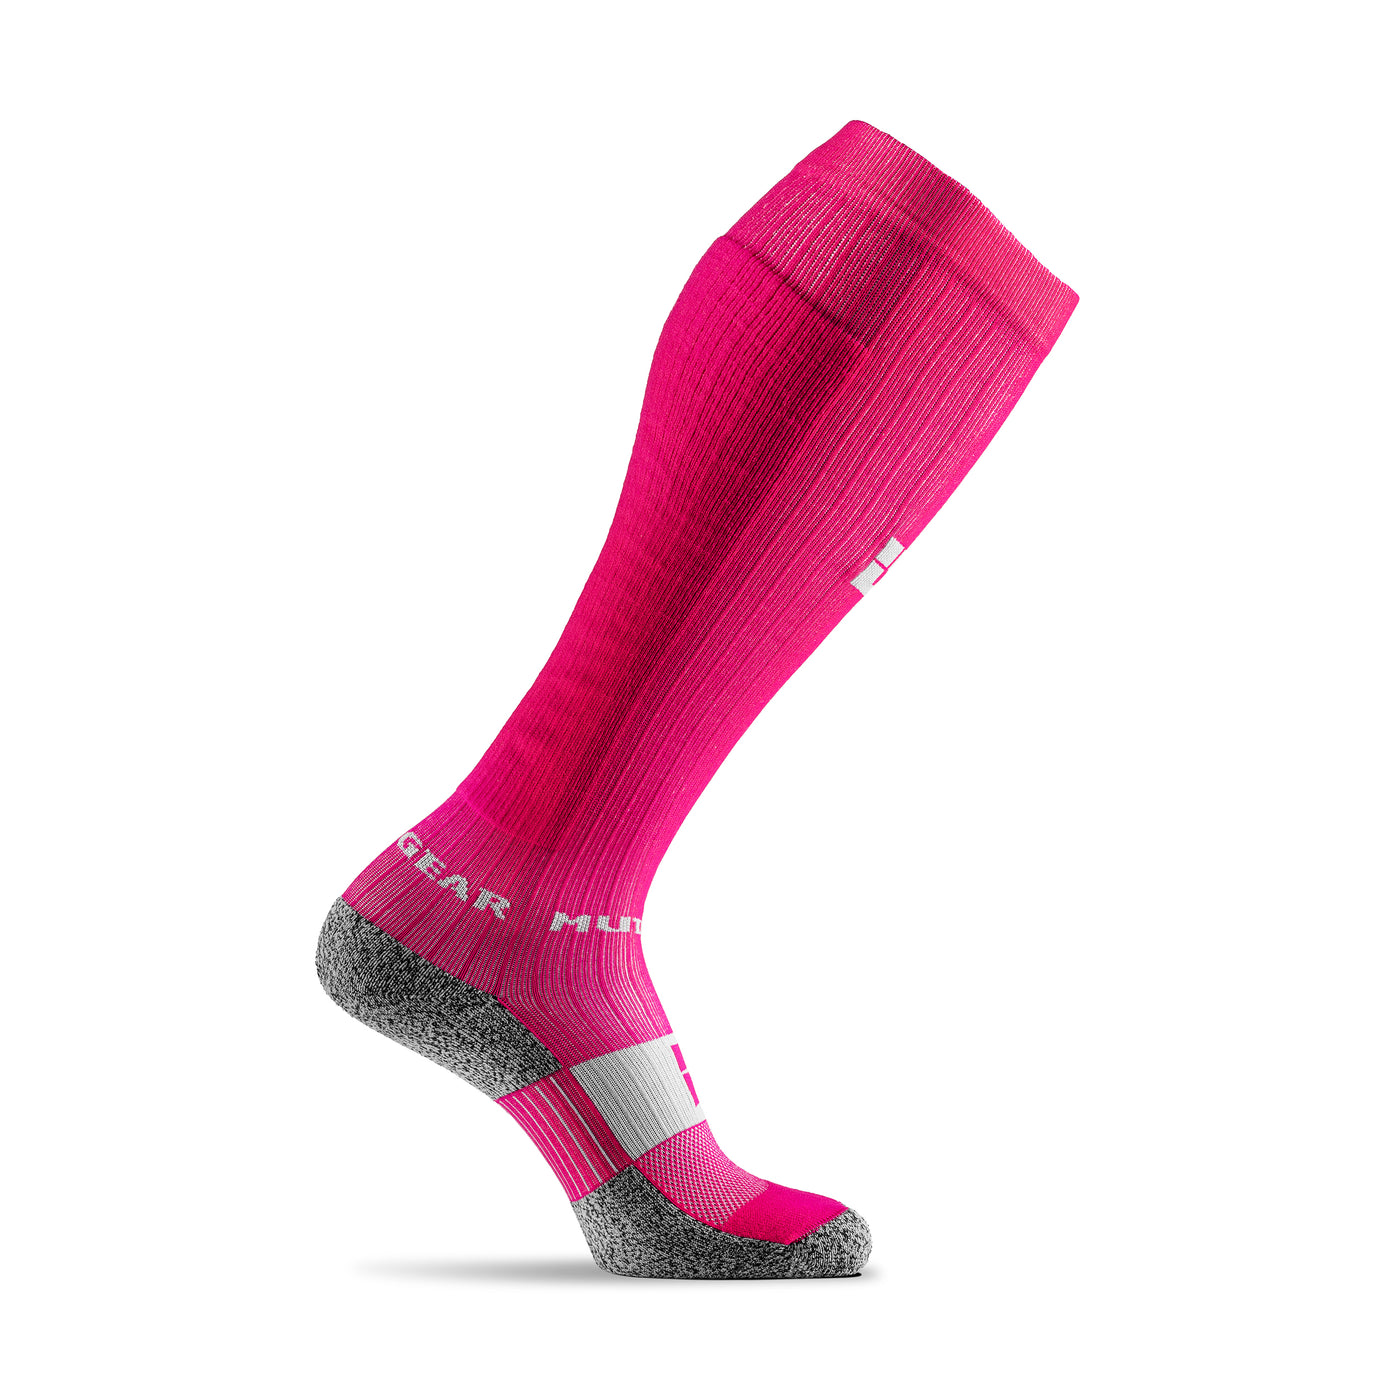 Tall Compression Socks for Obstacle Course Racing